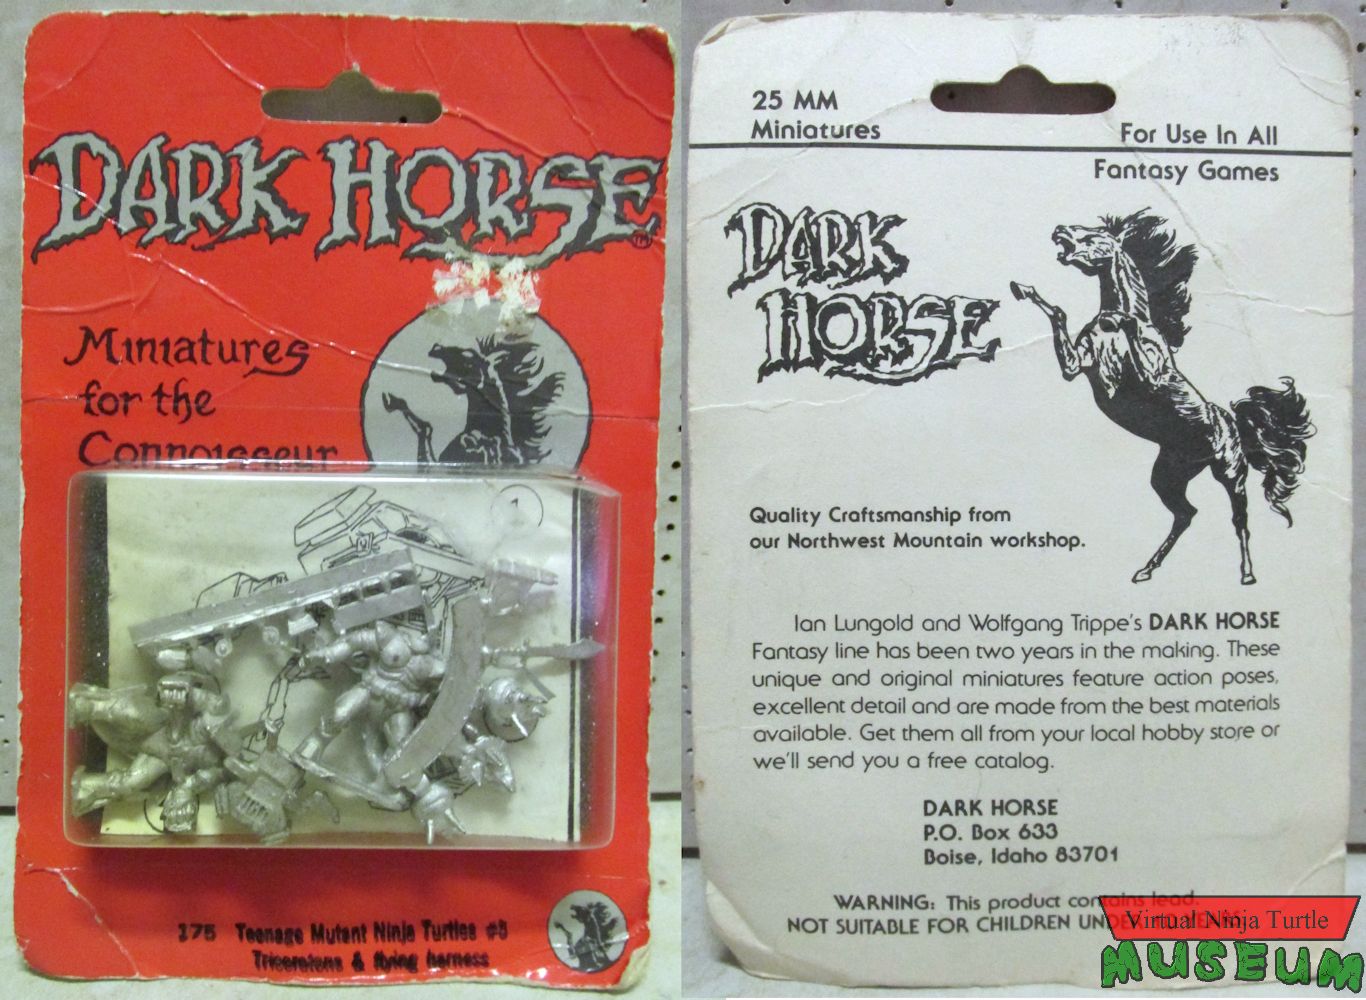 Dark Horse Card front and back